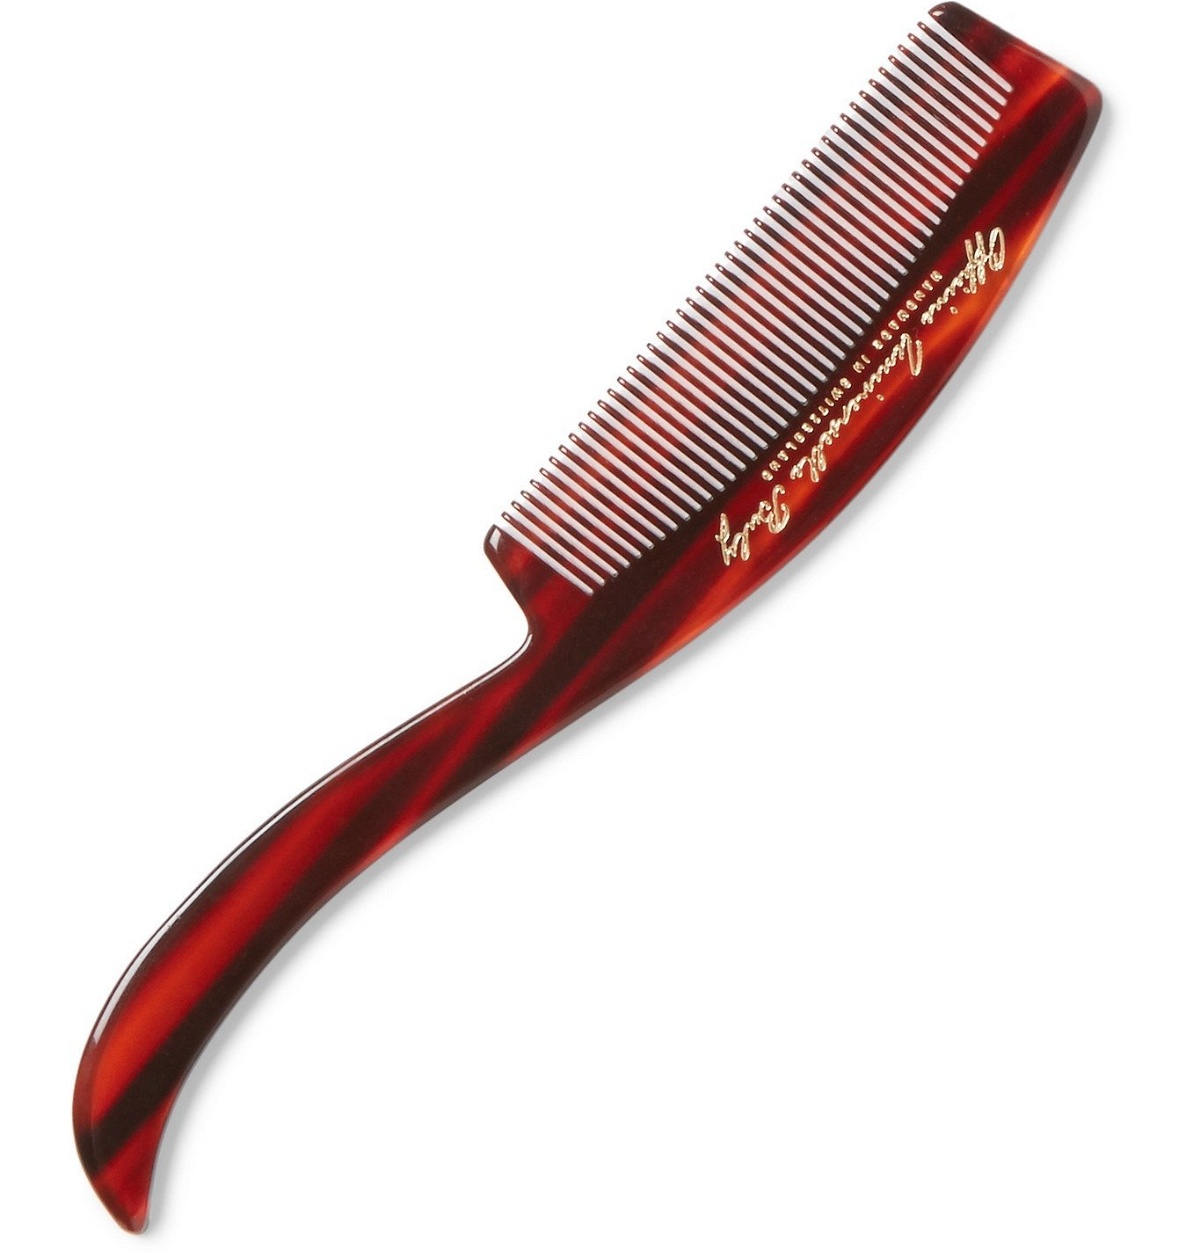 Buly 1803 - Horn-Effect Acetate Beard Comb - Red Buly 1803